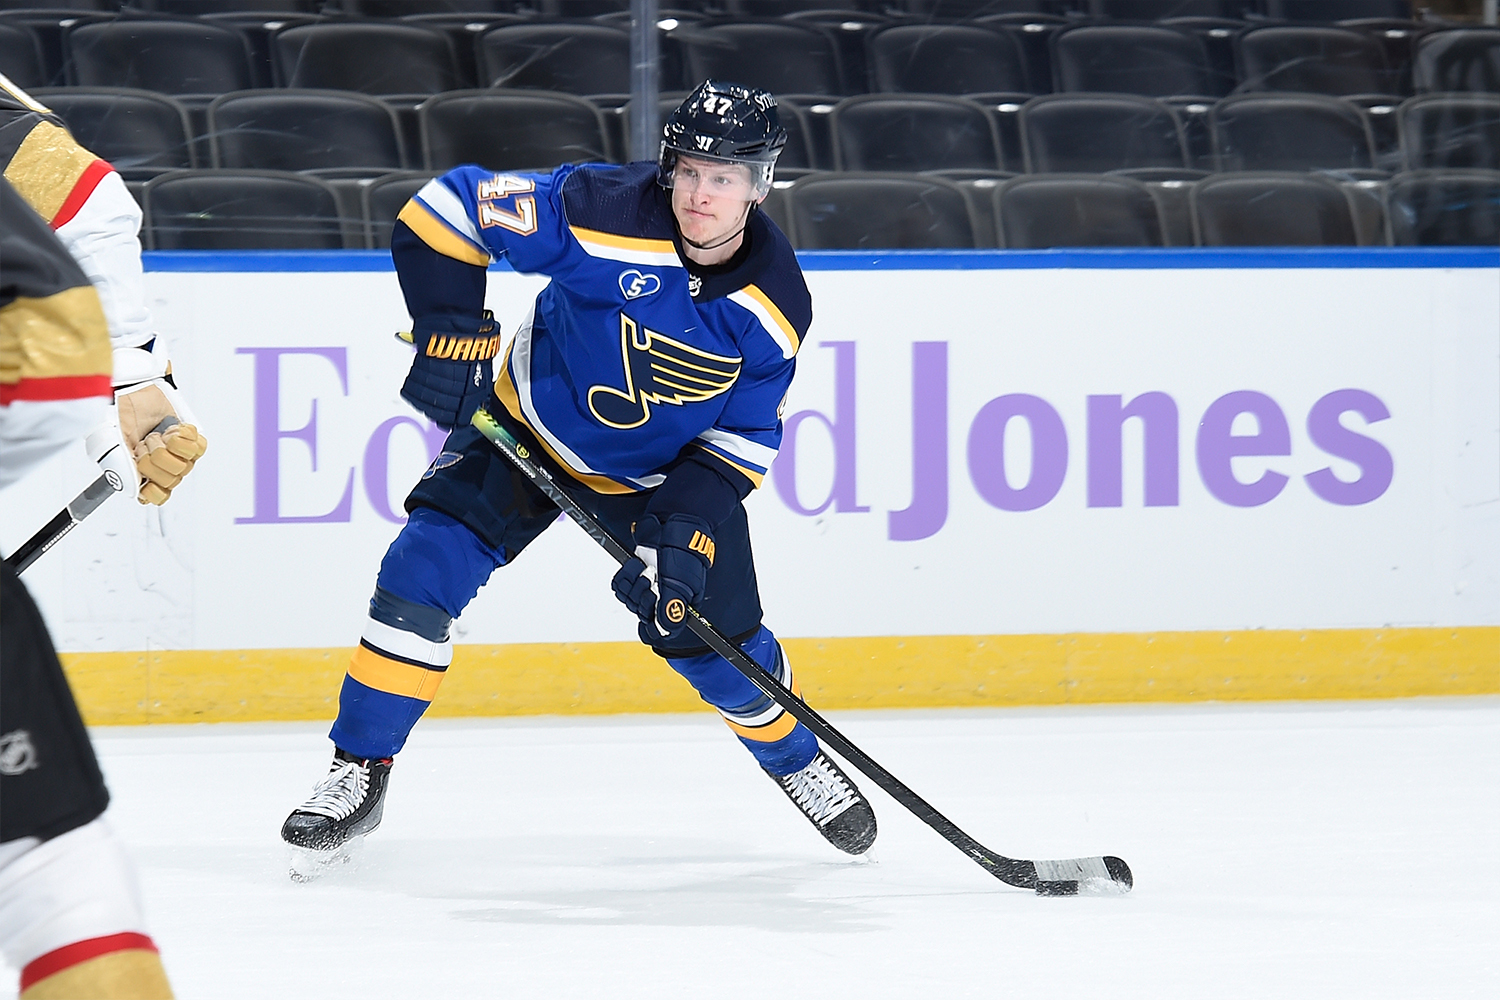 Torey Krug #47 of the St. Louis Blues in action against the Vegas Golden Knights on April 7, 2021